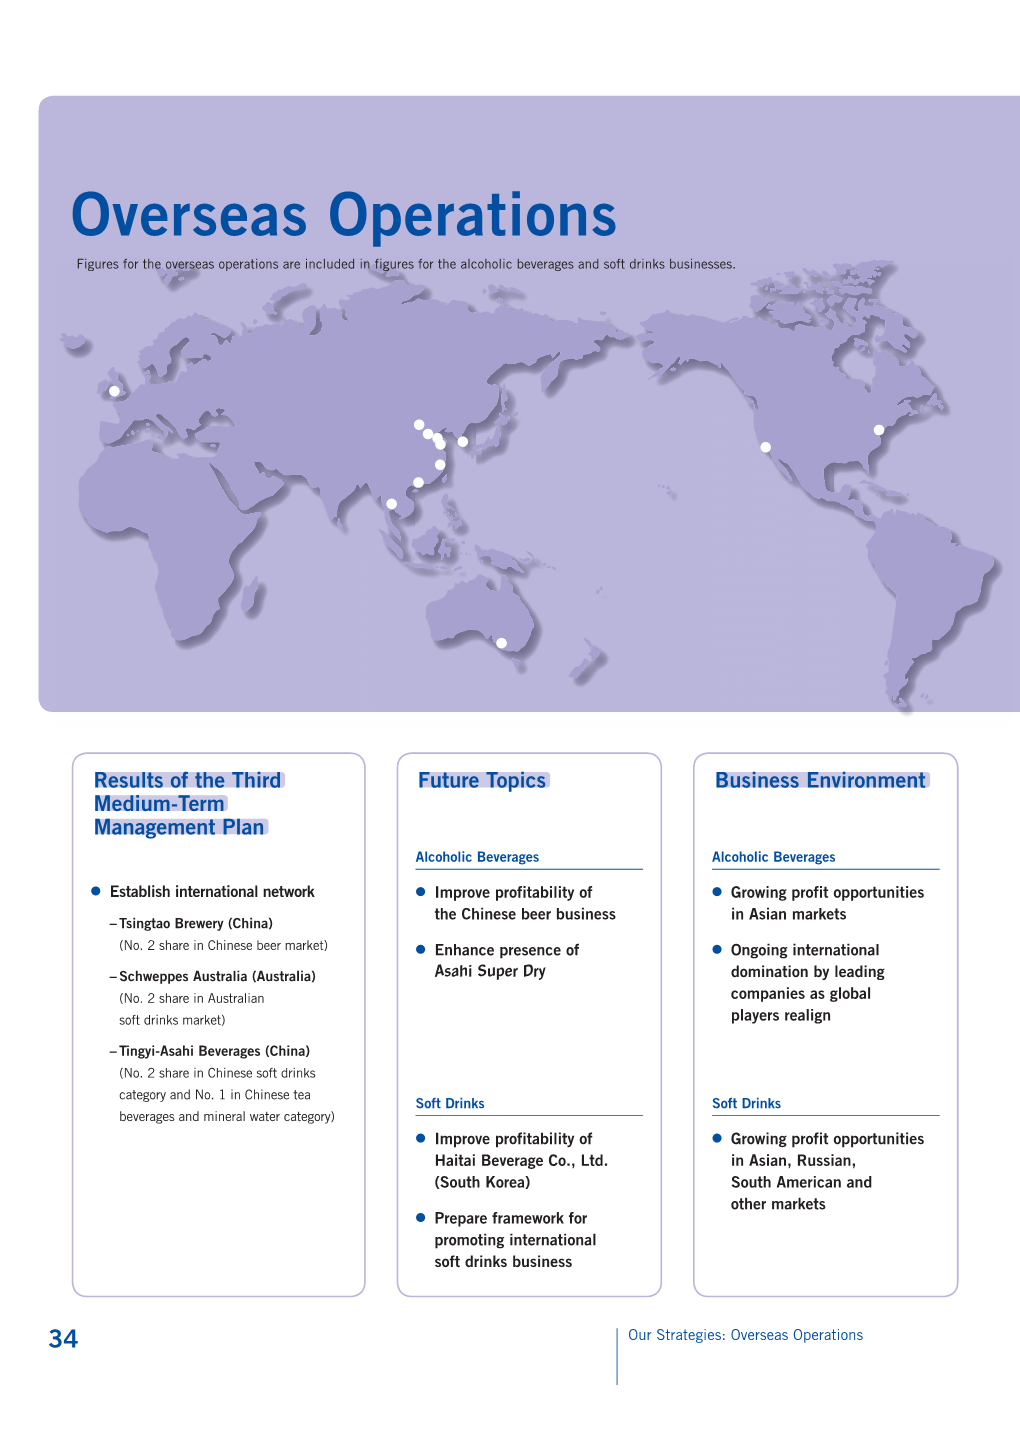 Overseas Operations Figures for the Overseas Operations Are Included in Figures for the Alcoholic Beverages and Soft Drinks Businesses